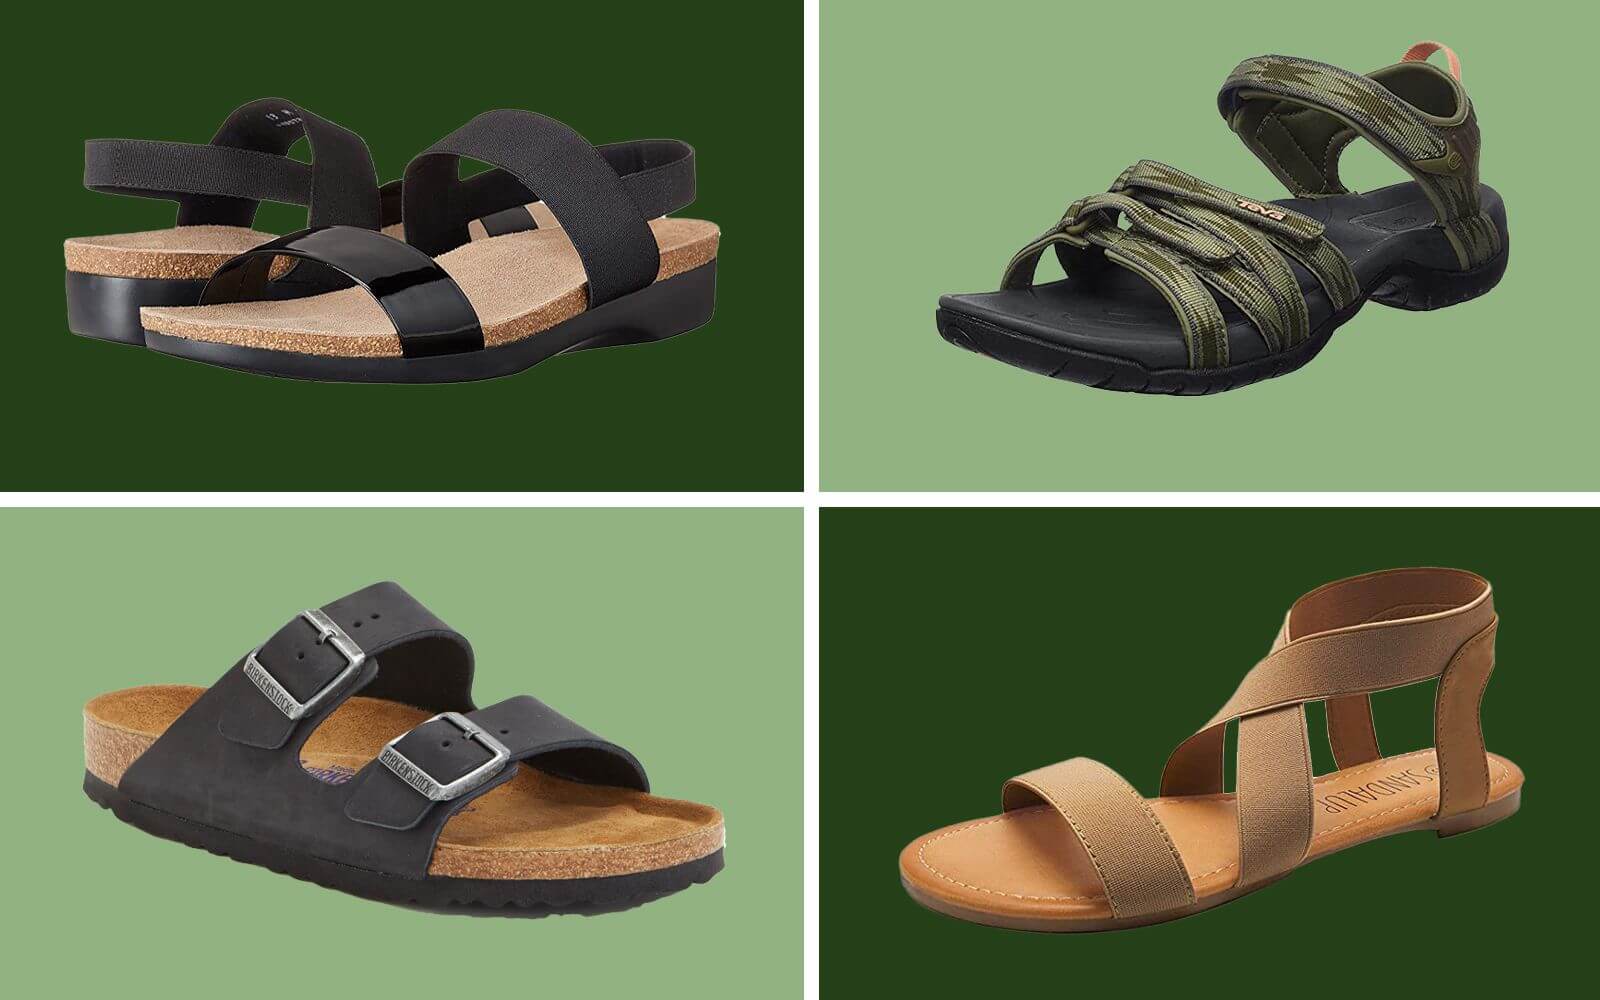 Qualities that align with a comfortable sandal